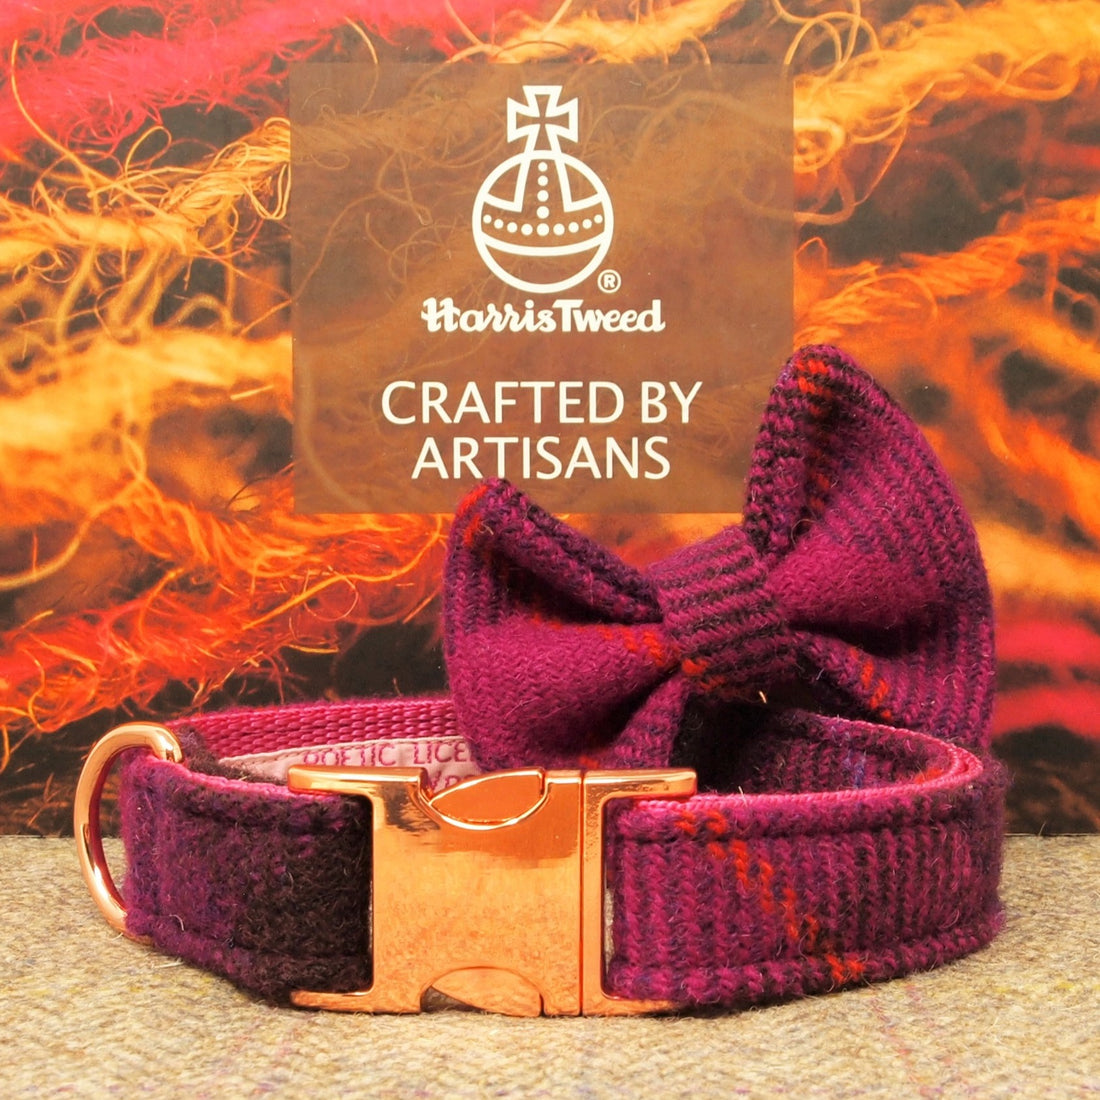 magenta purple tartan harris tweed dog collar and bow tie with gold buckle. Optional to have dogs name on collar in gold foil, silver foil or neutral deboss on veg tan leather